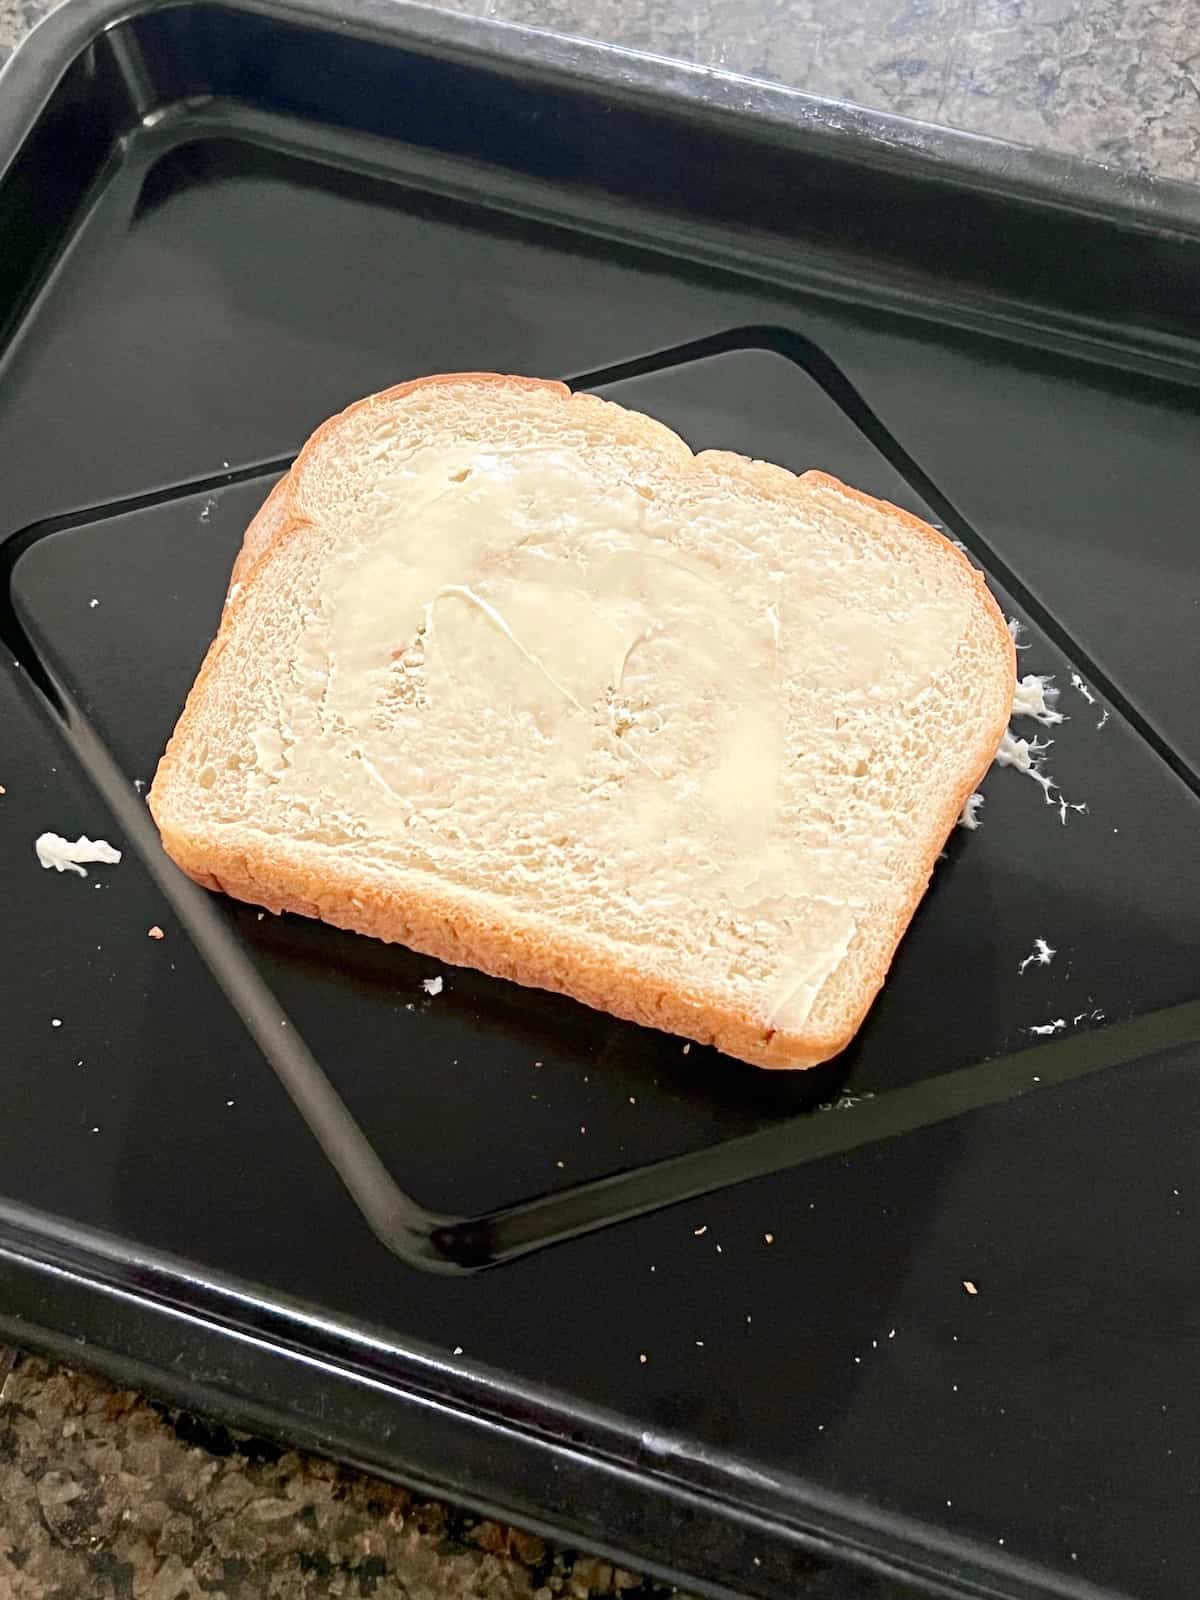 Baking tray with a prepared sandwich with butter facing up on the bread.